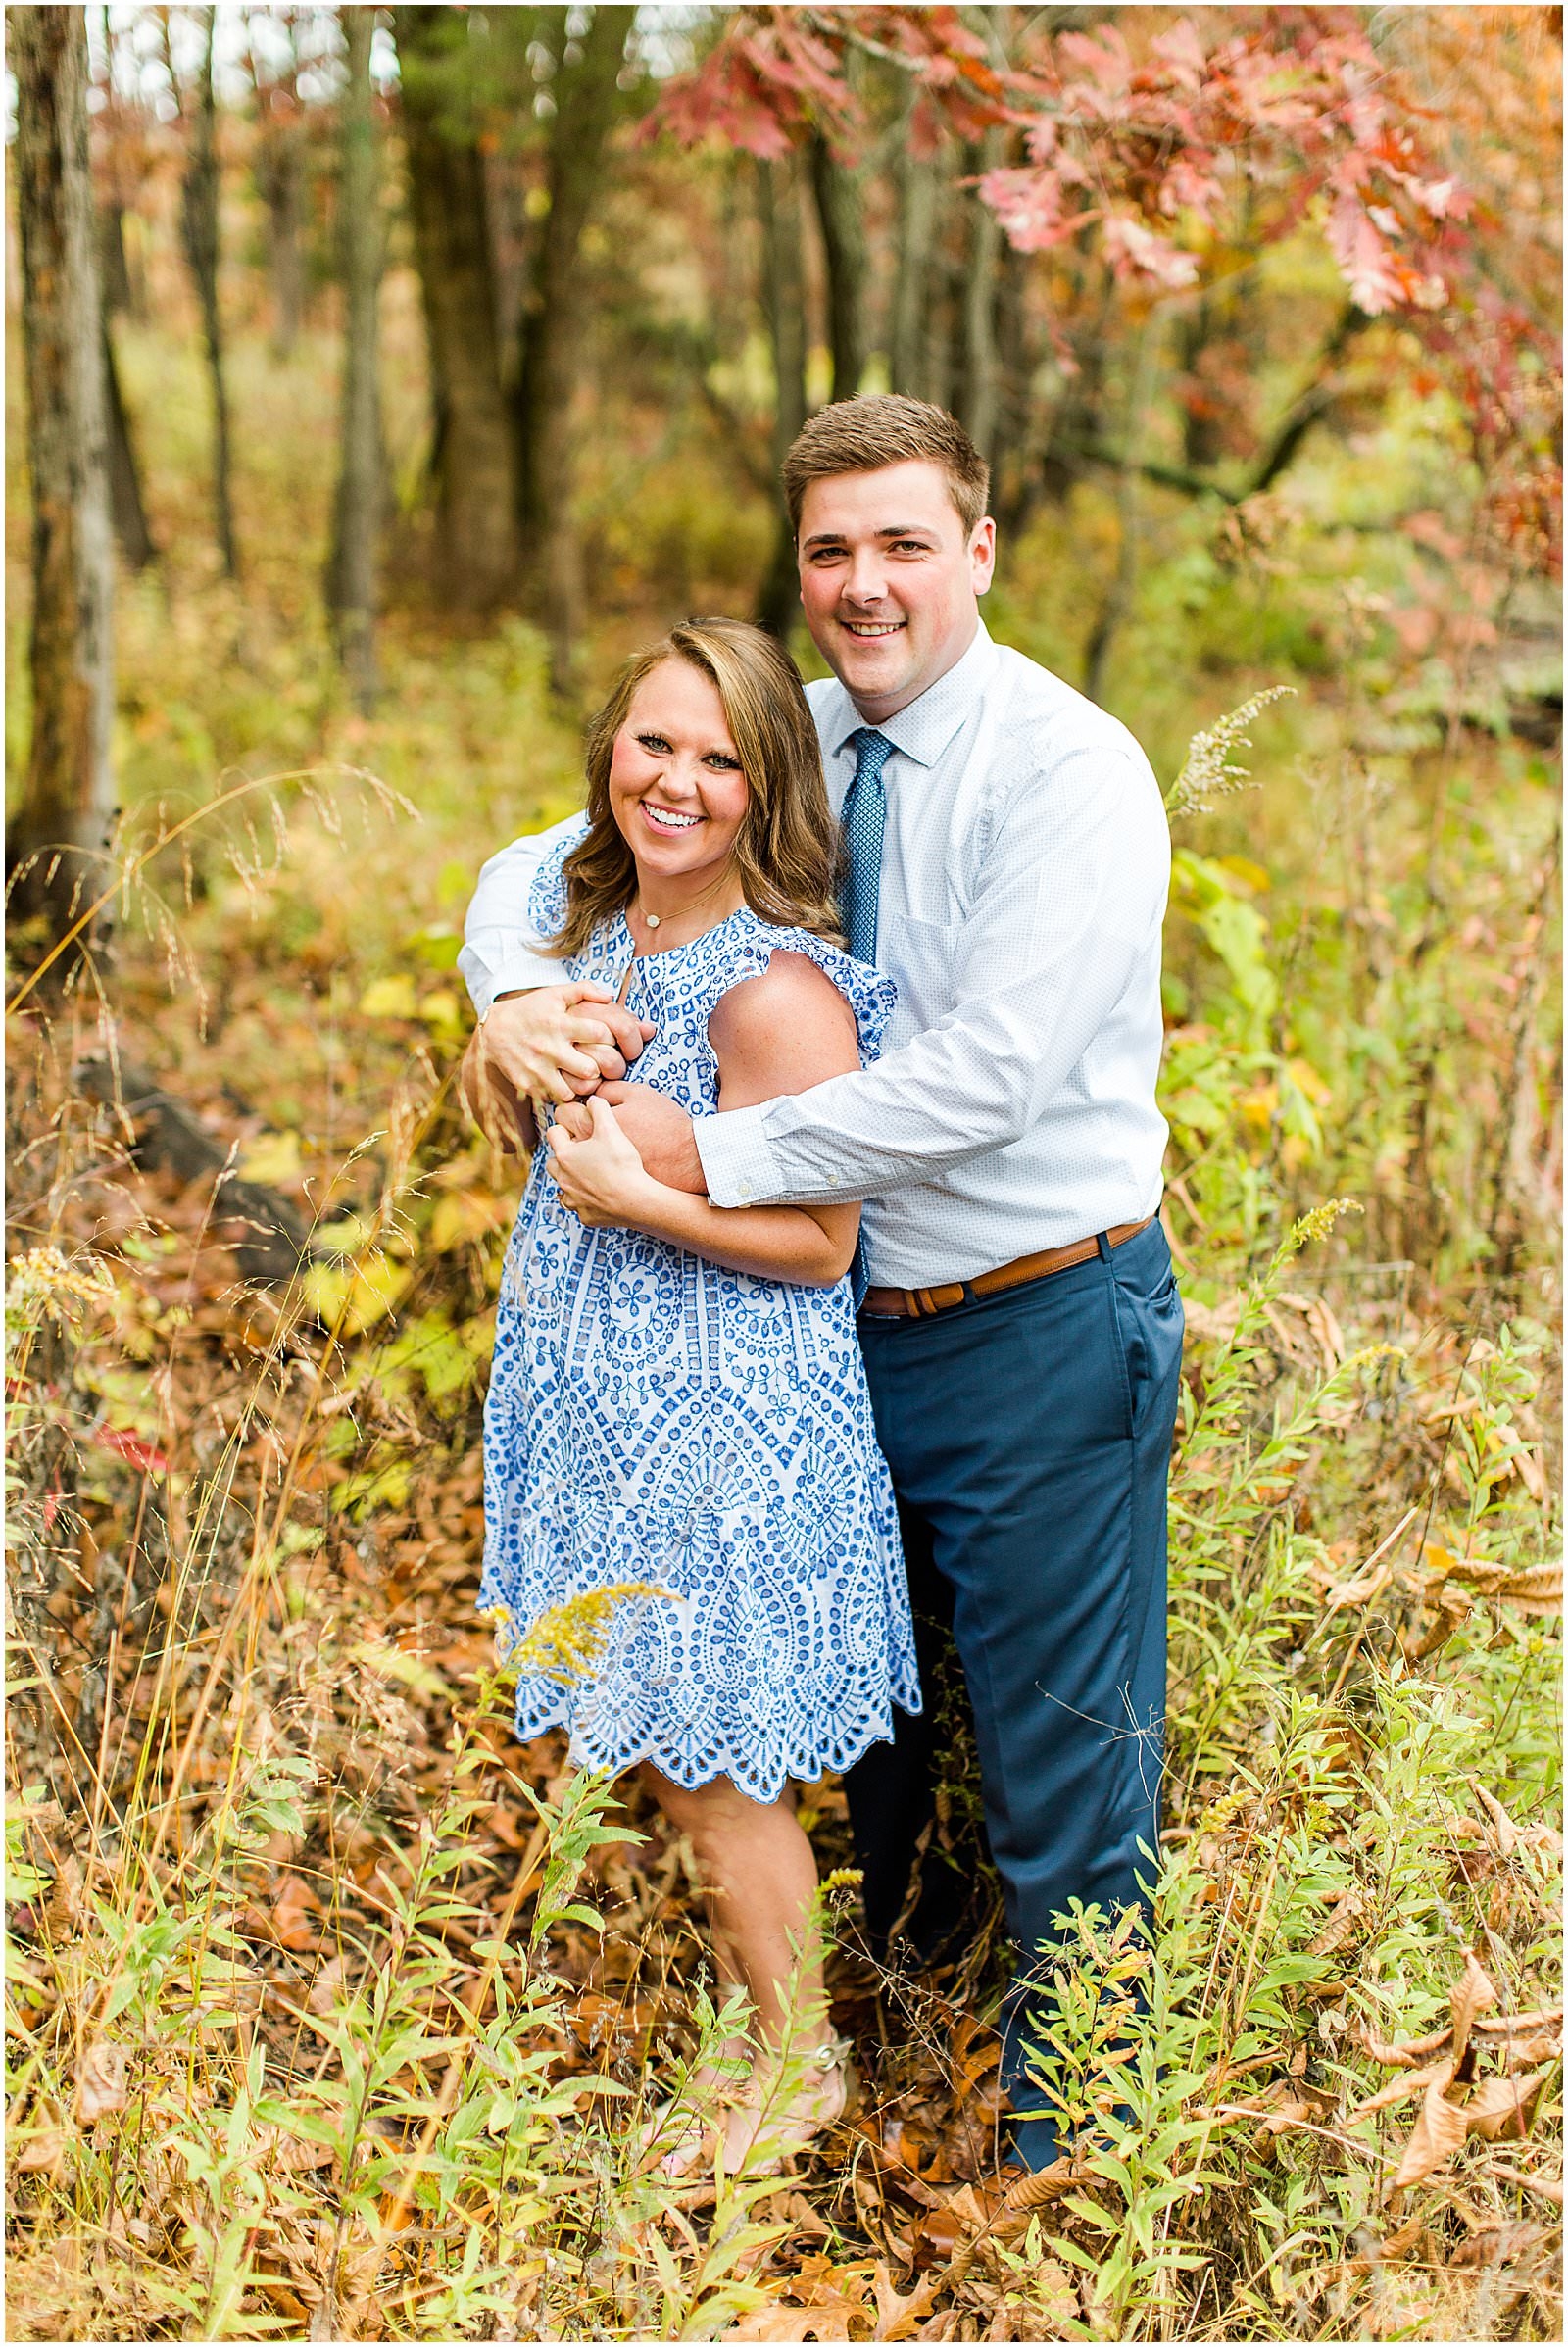 A Southern Illinois Engagement Session | Roxanne and Matthew | Bret and Brandie Photography 0001.jpg